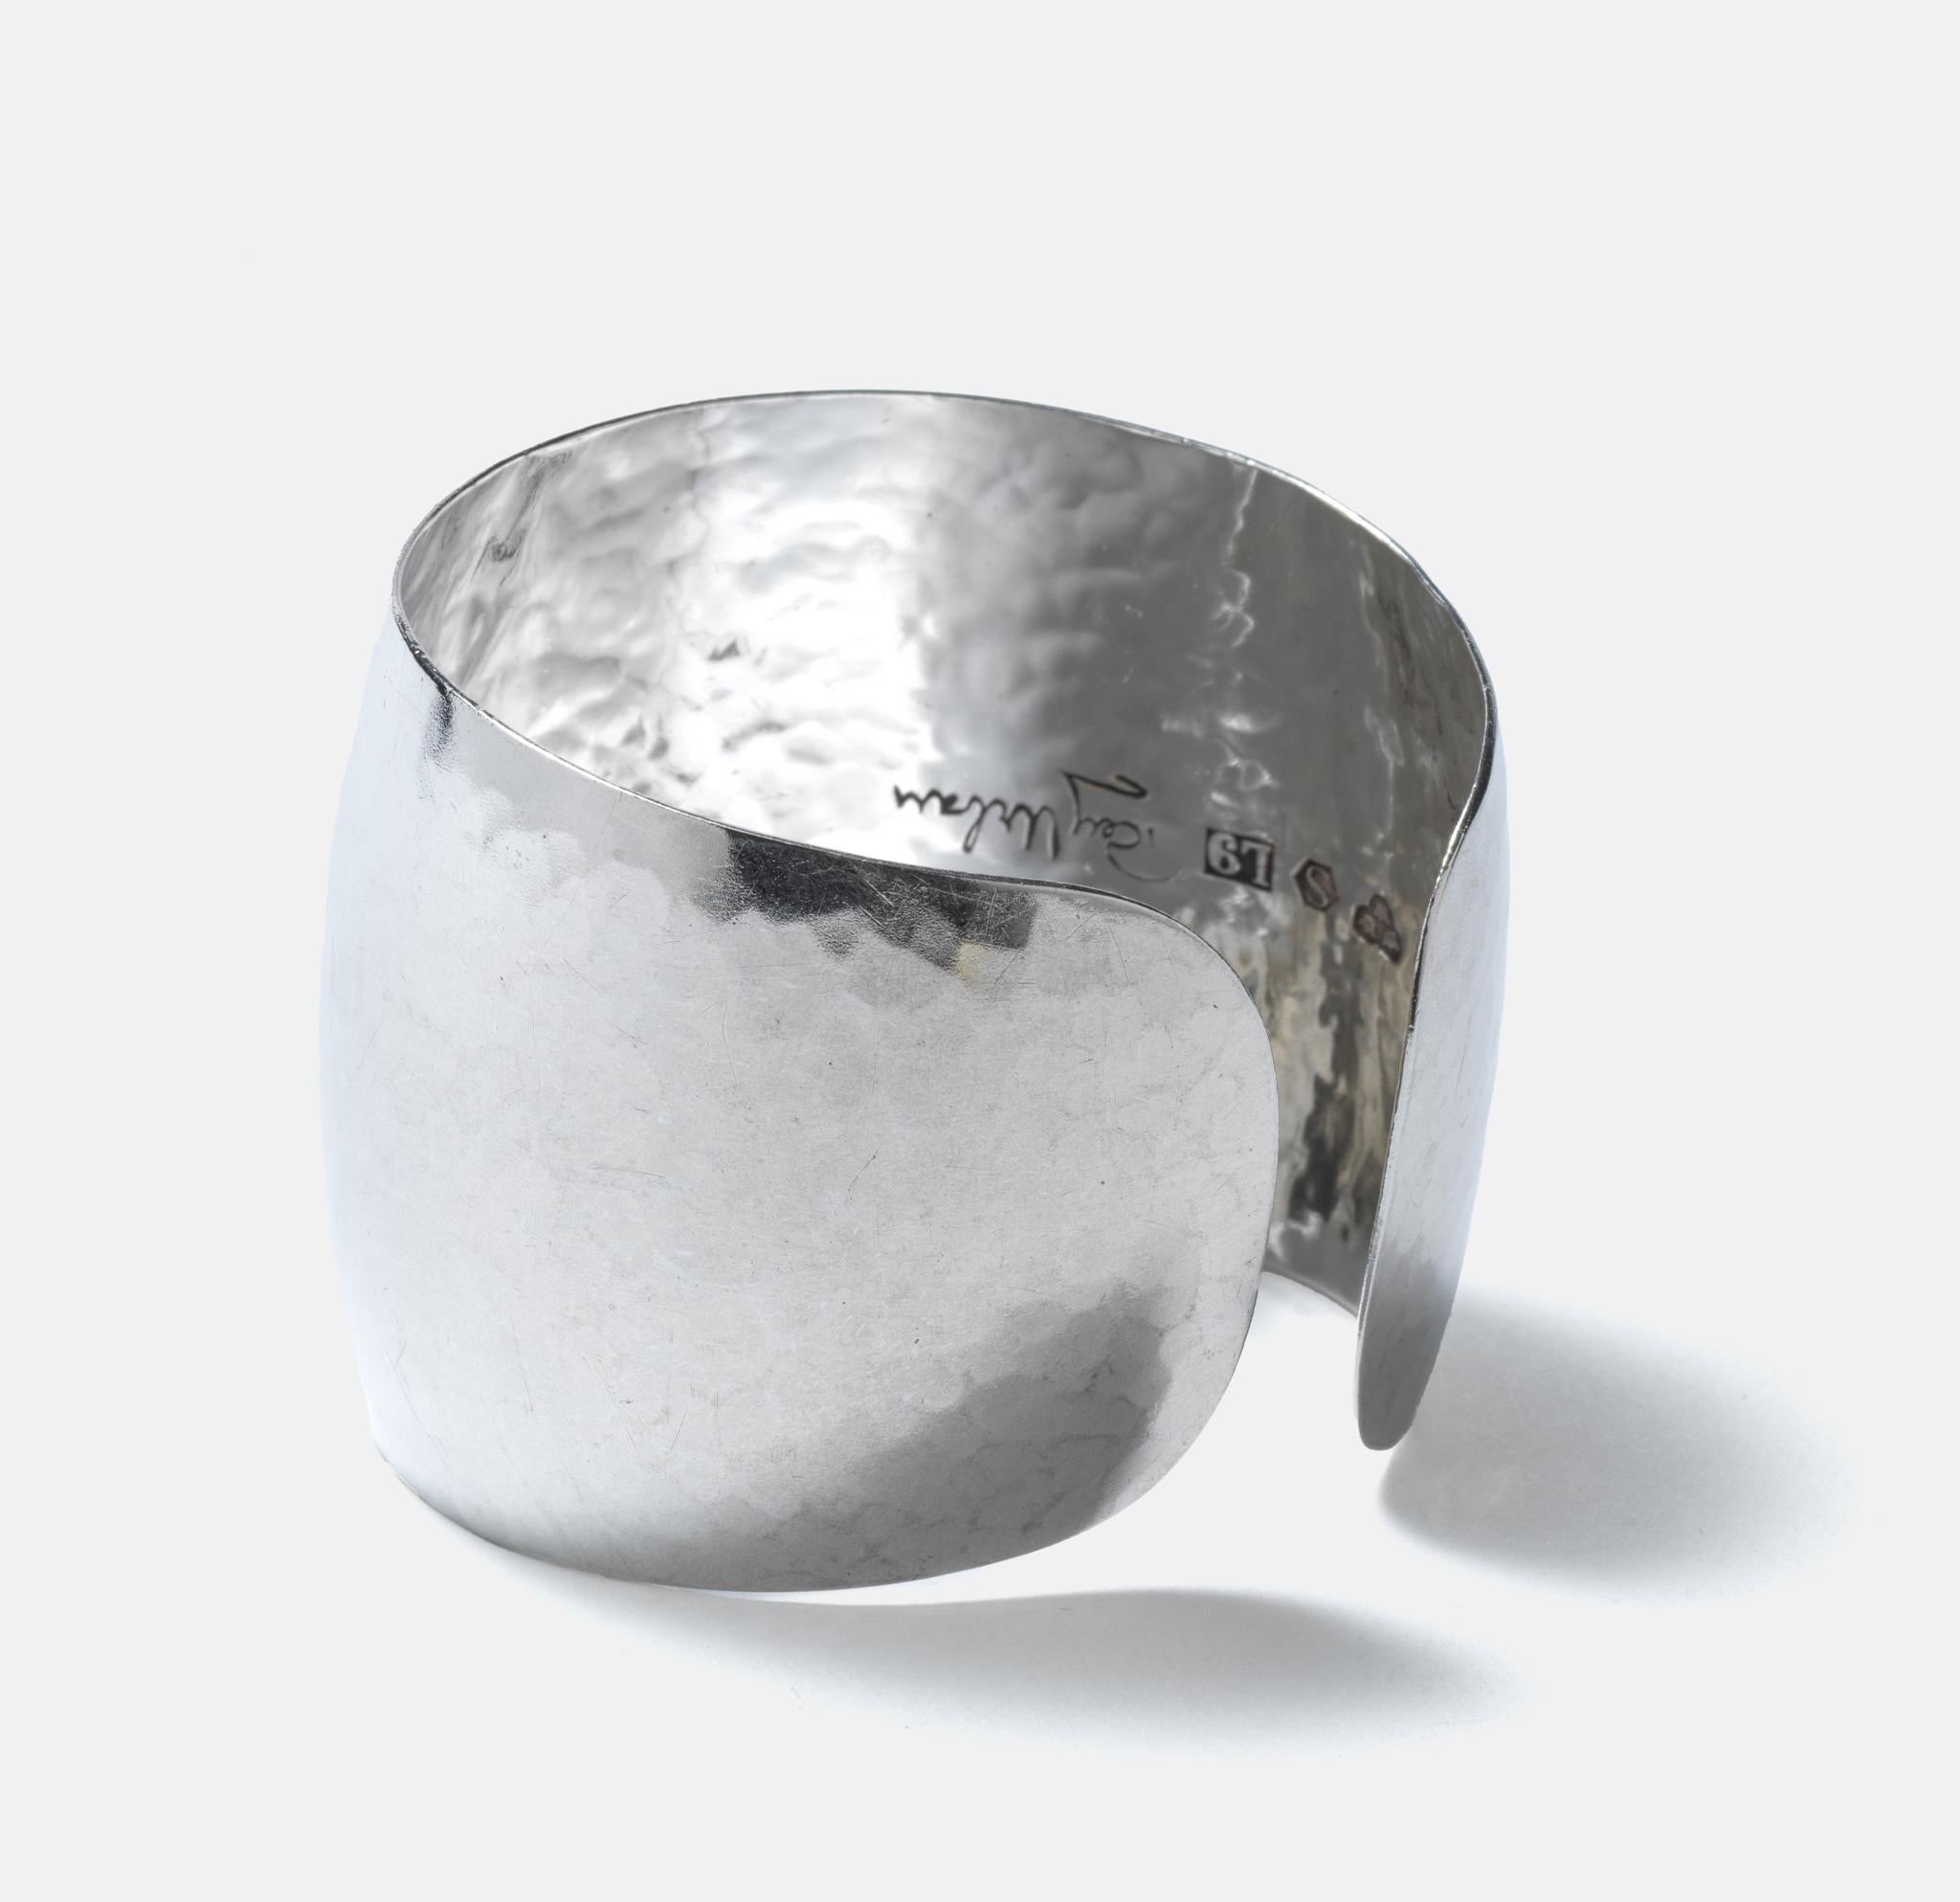 This sterling silver cuff bracelet has a glossy and hammered surface, and also a beautiful arched shape. It may be described as strong, simple and on point. 
This is an early work by Rey Urban and as always the early works are the best.

The